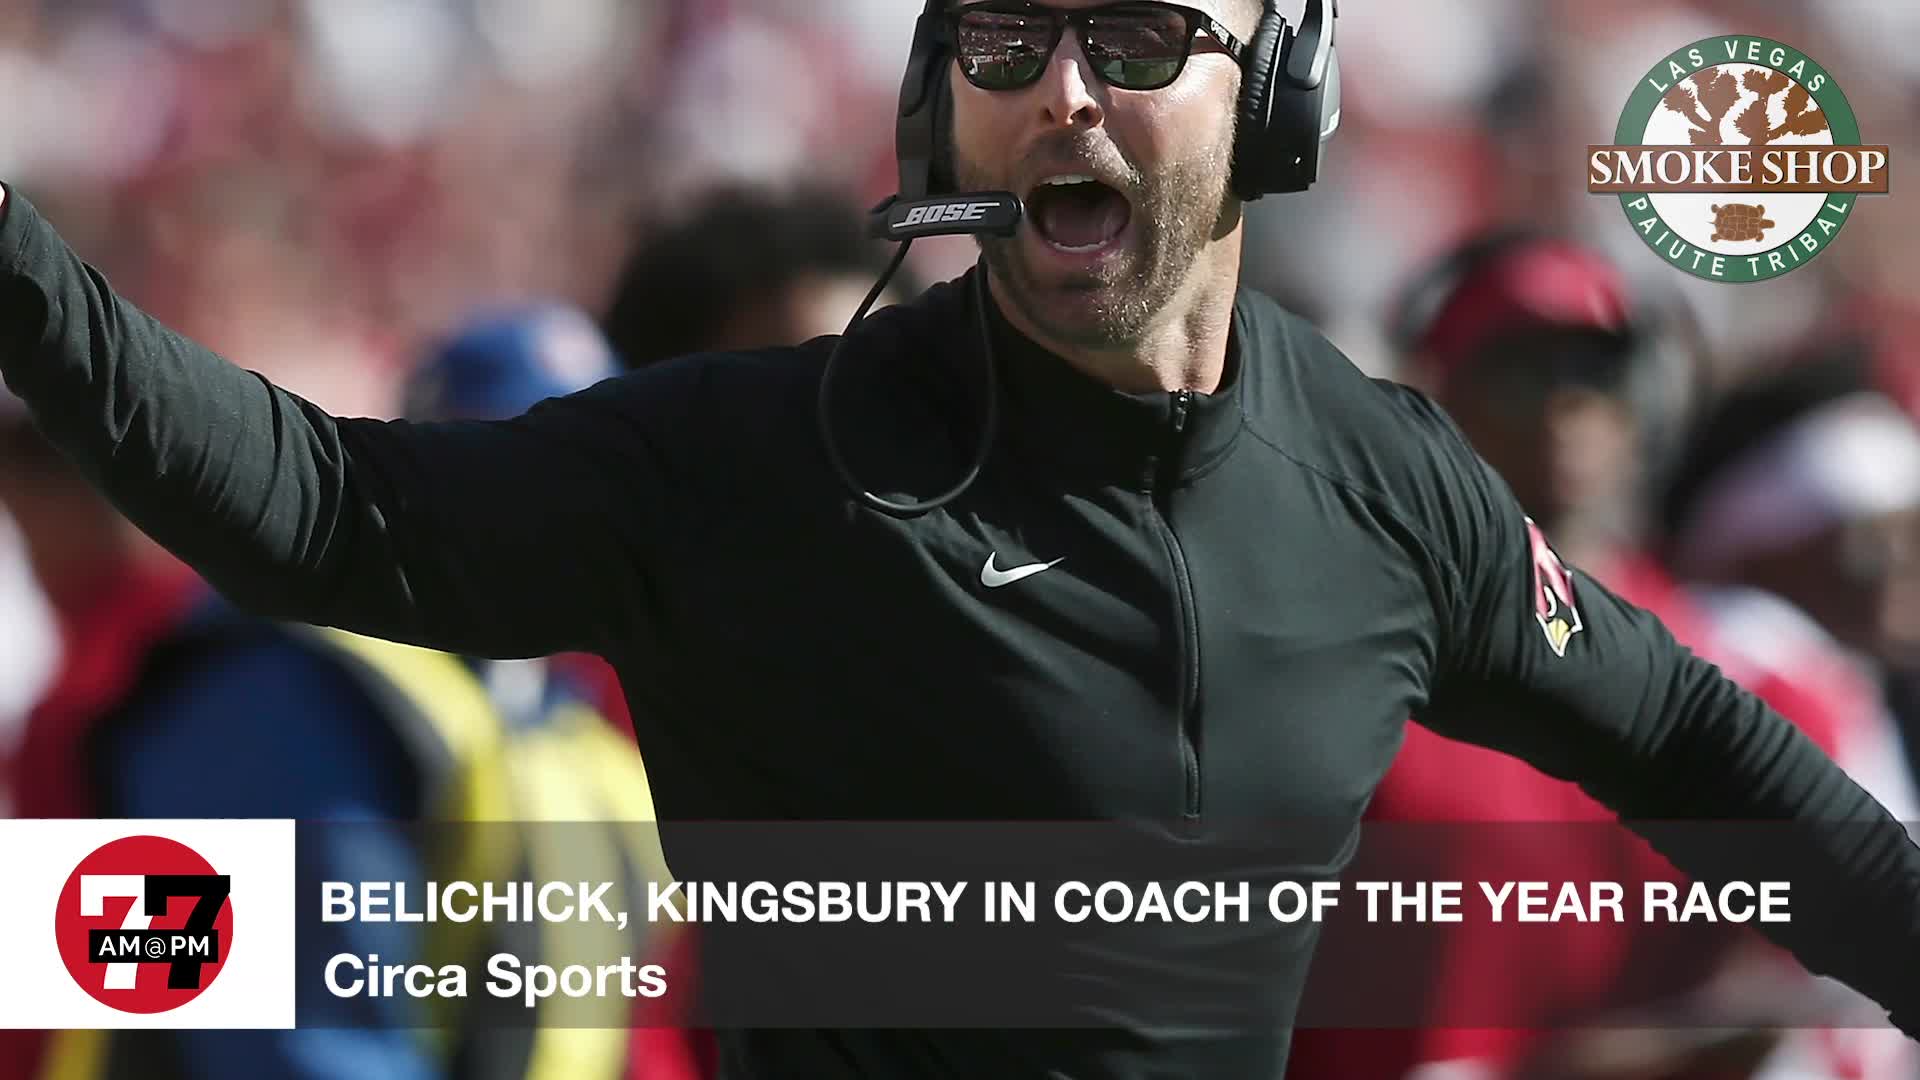 7@7PM NFL Coach of the Year Race